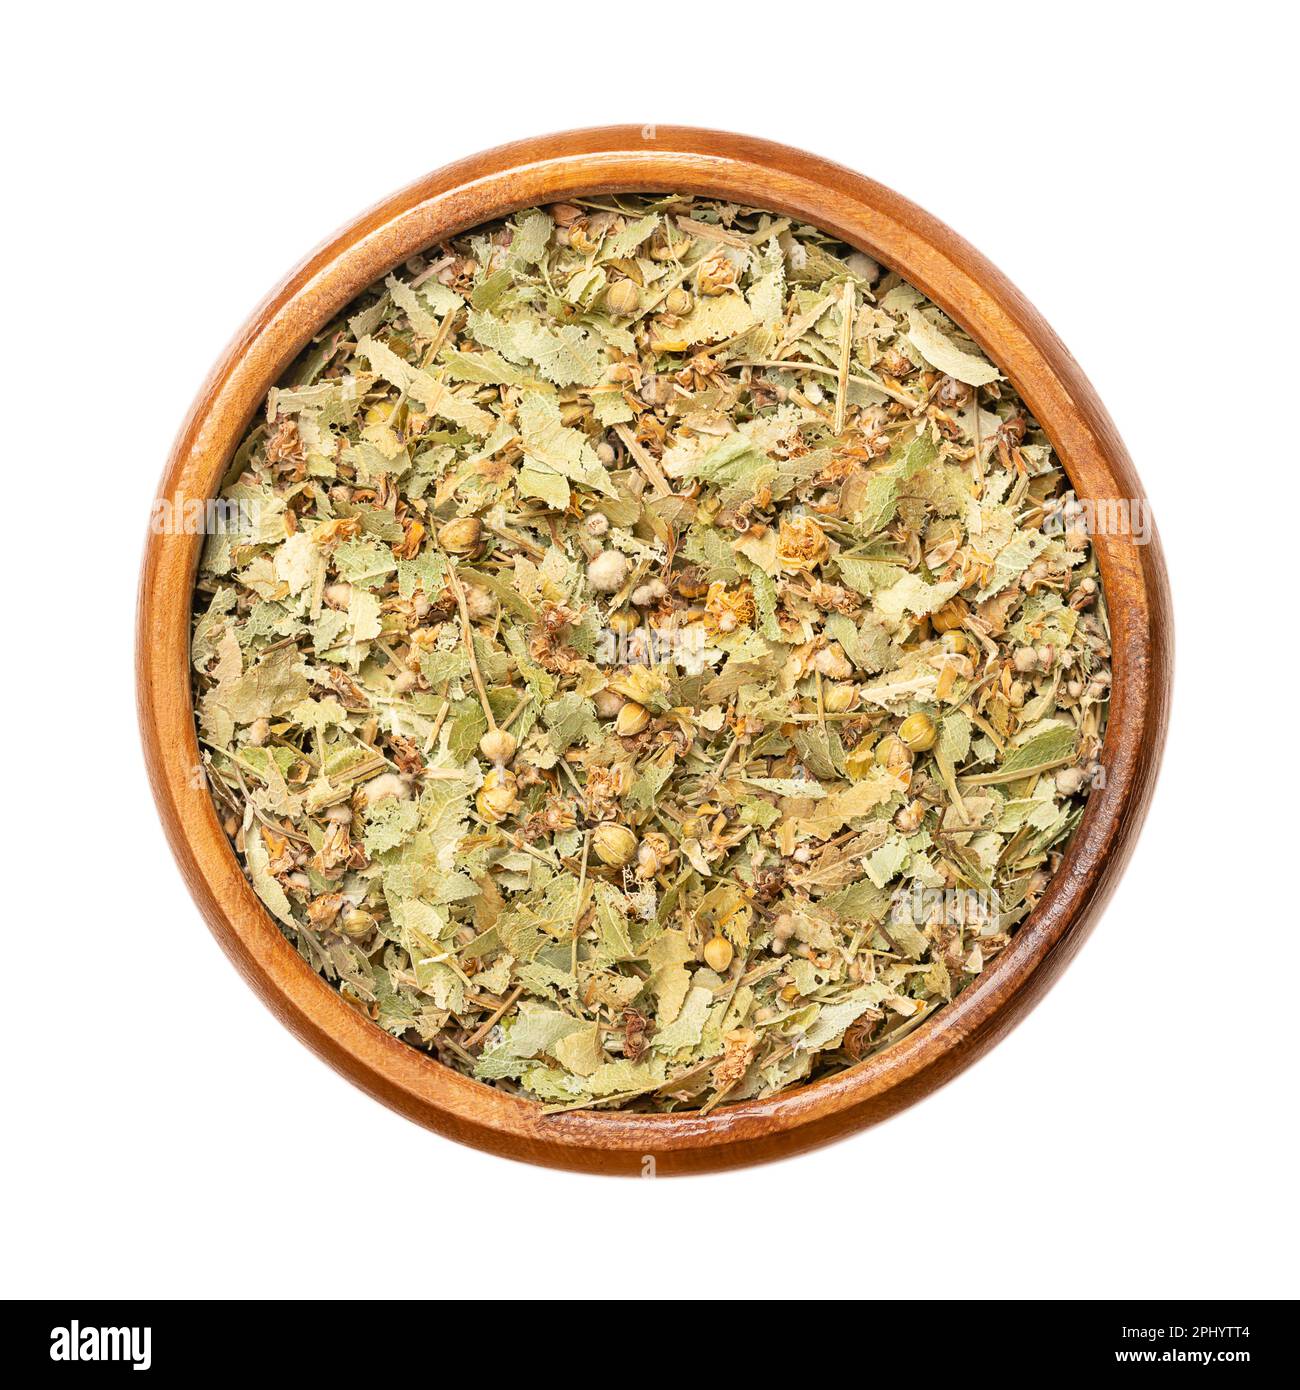 Dried linden flowers, in a wooden bowl. Flowers, fruits and bract leaves of the large-leaved linden or lime tree, Tilia platyphyllos. Herbal tea. Stock Photo